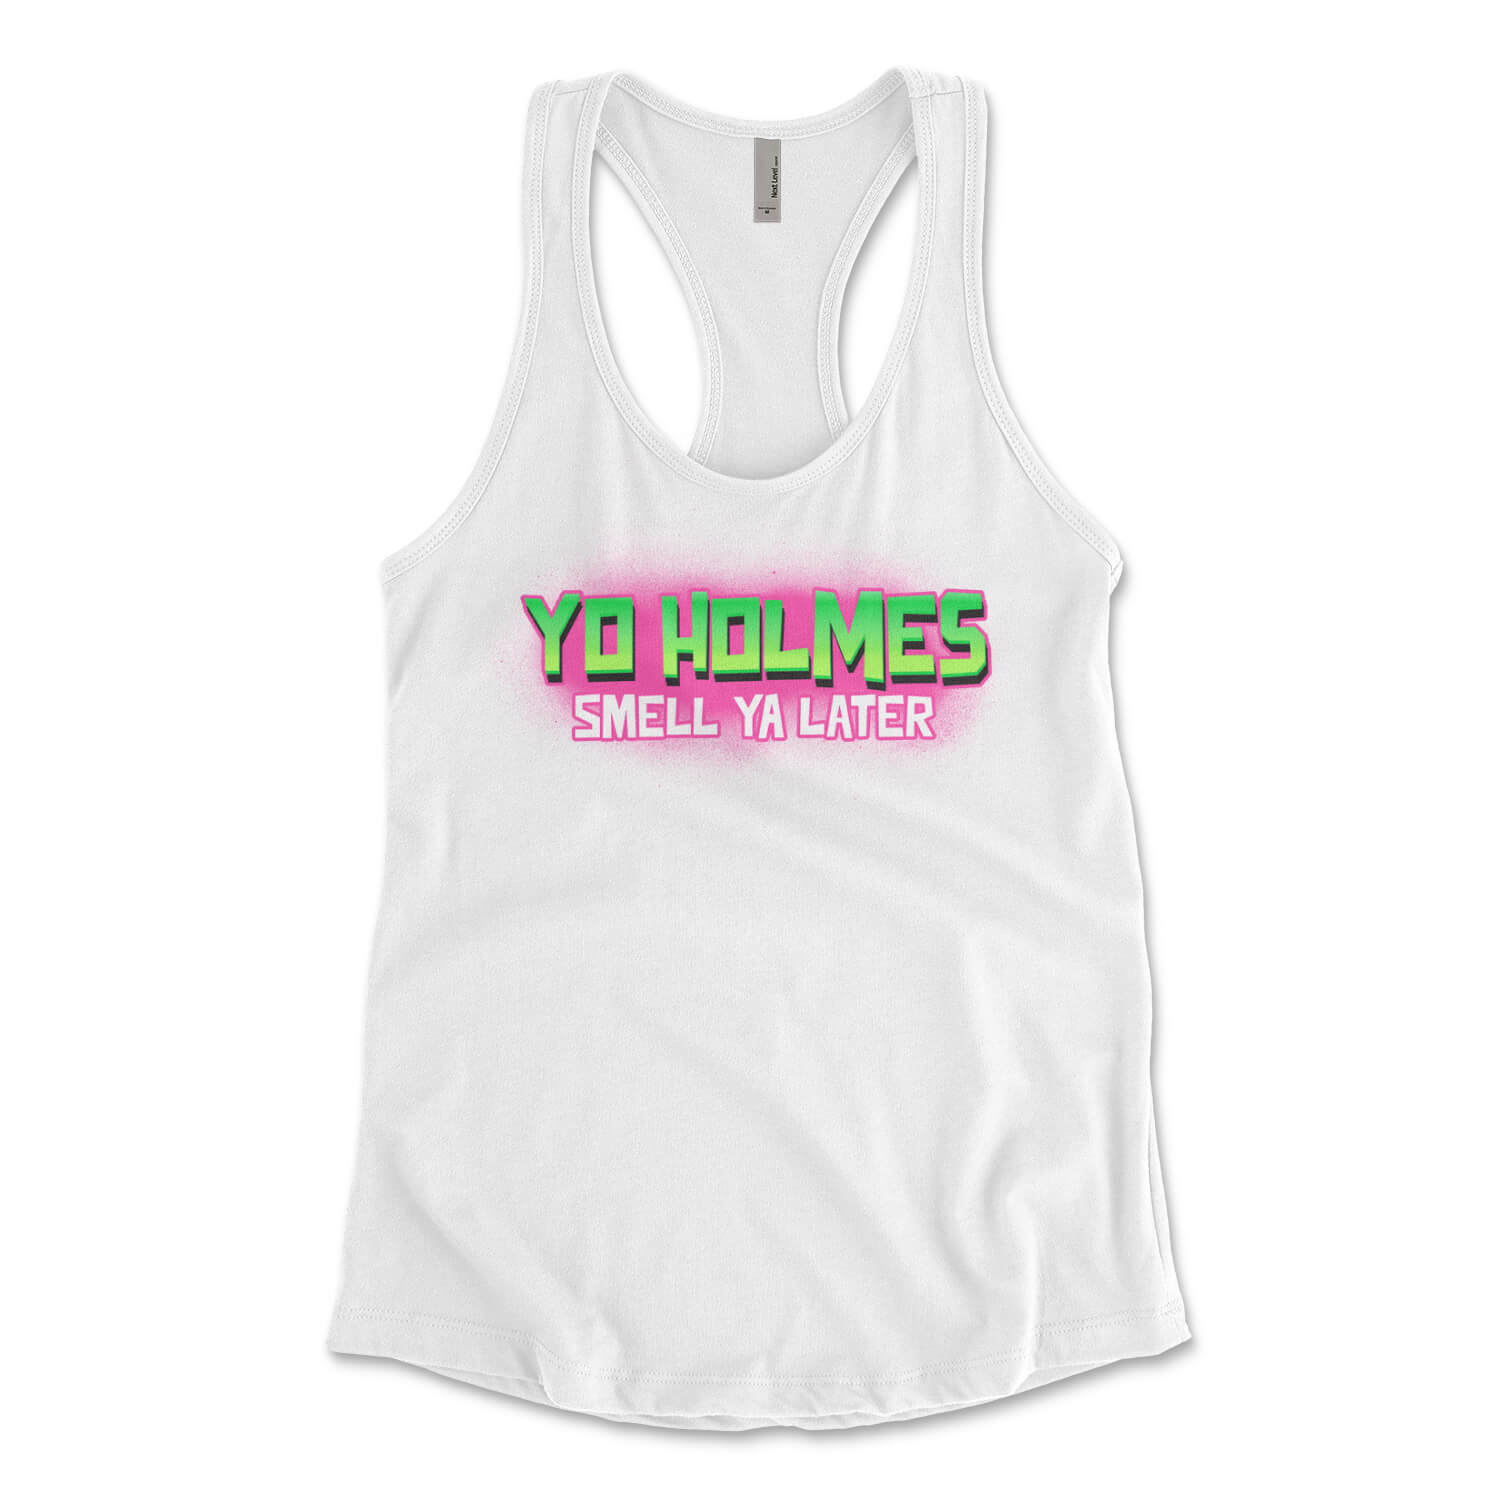 Fresh Prince of Bel-Air Yo Holmes smell ya later white womens racerback tank top from Phillygoat